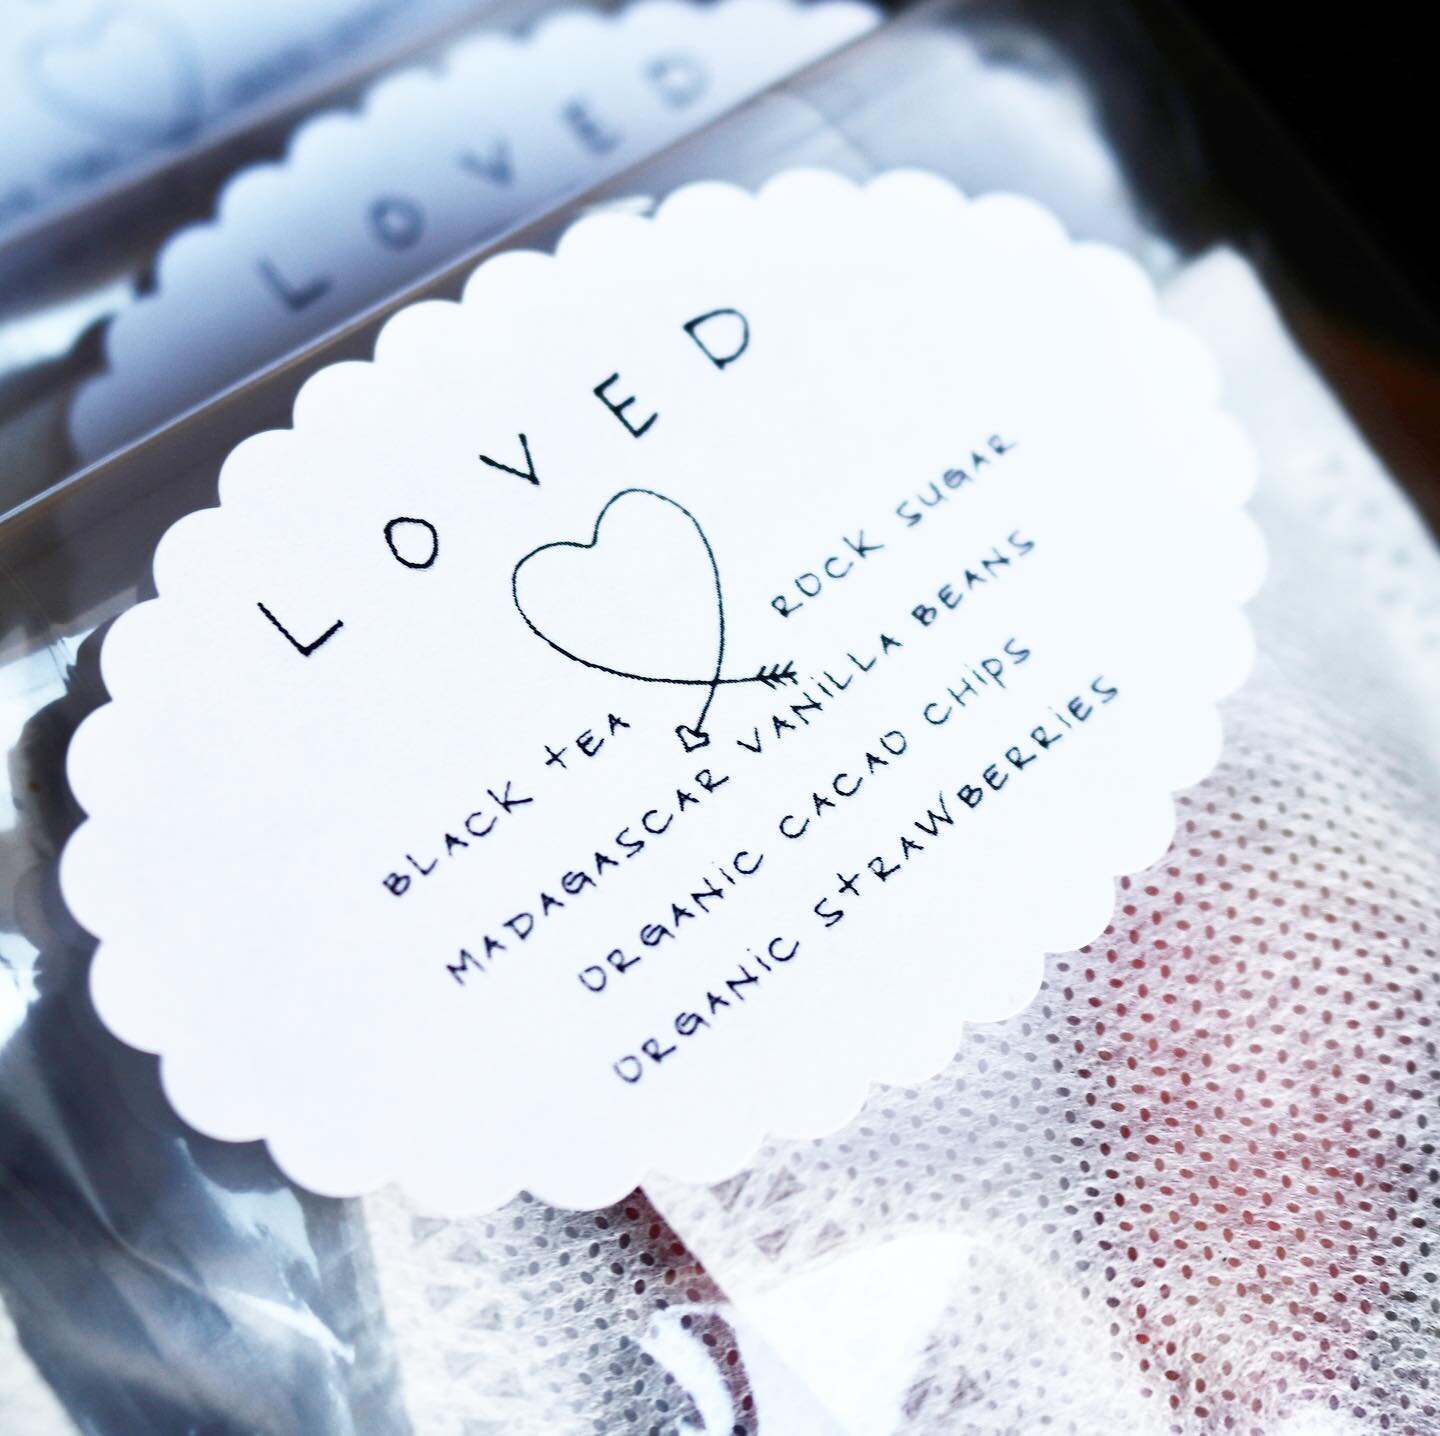 L o v e d ❤️ 🫖 
Share love this Valentine&rsquo;s Day with our handcrafted blend of Black Tea, rock sugar, Madagascar vanilla beans, unsweetened cocoa chips, and organic dehydrated strawberries. Available online and In store at Wildflower Boutique I